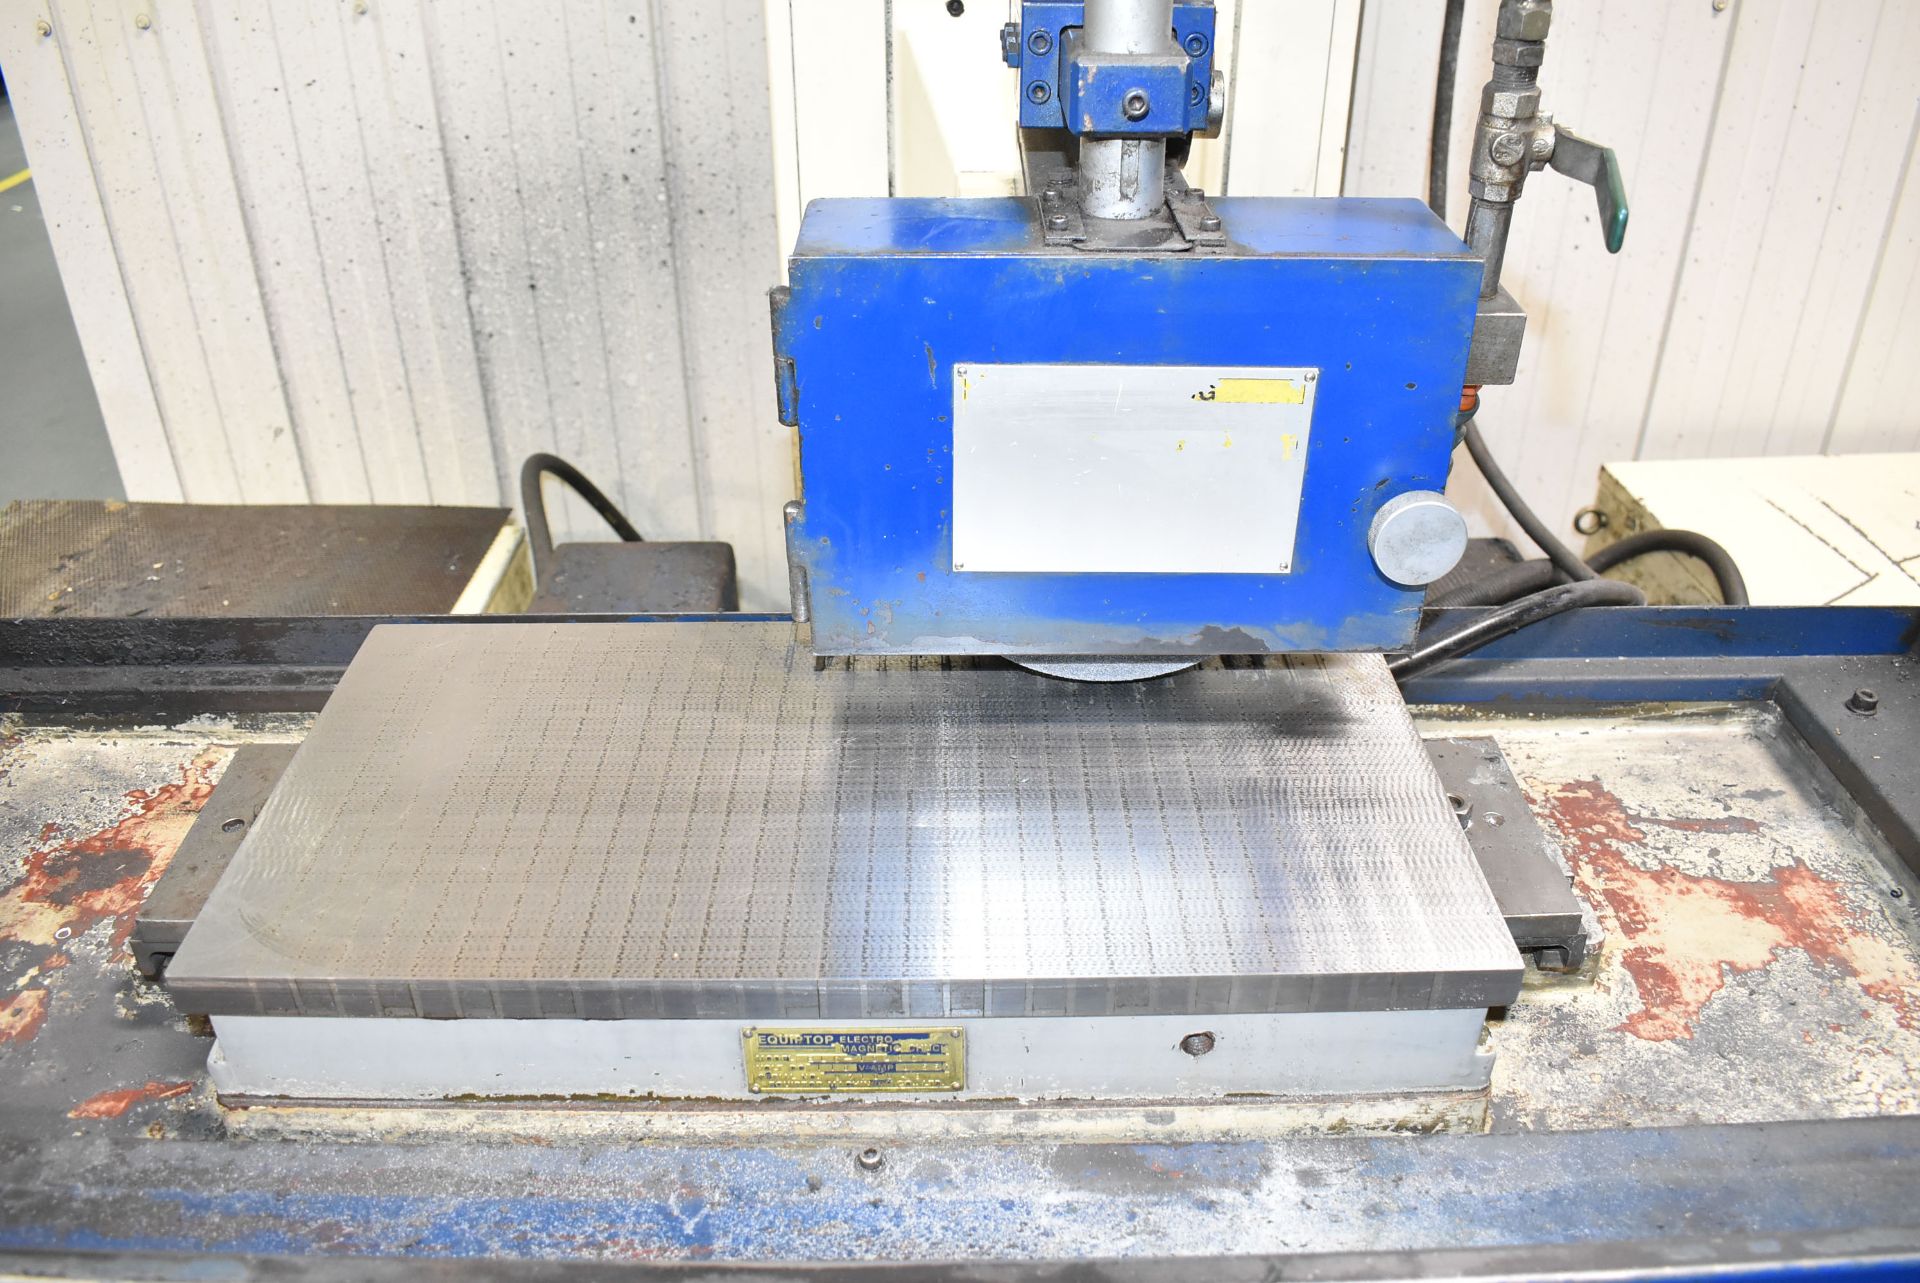 CLAUSING CSG-1020ASD HYDRAULIC SURFACE GRINDER WITH 10" X 20" MAGNETIC CHUCK, 840 LB MAXIMUM TABLE - Image 3 of 8